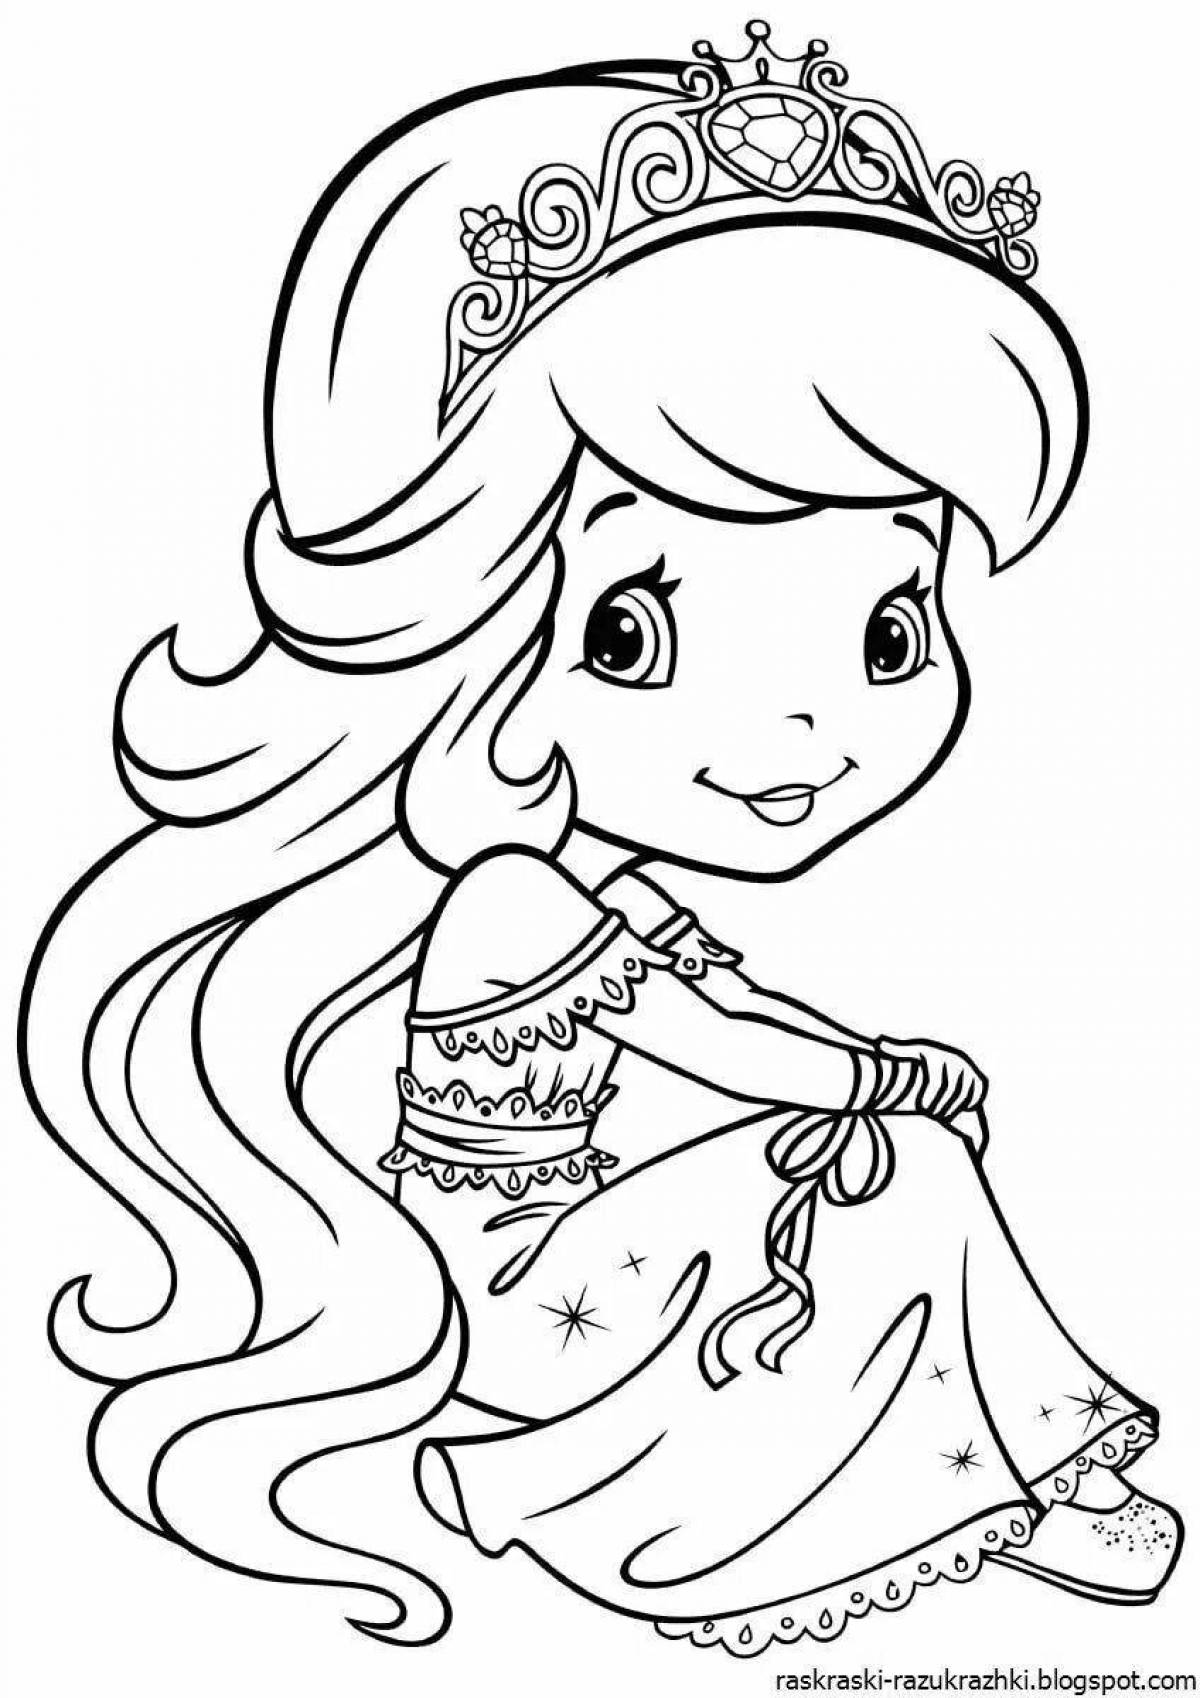 Glitter coloring book for children 5-6 years old for girls princess